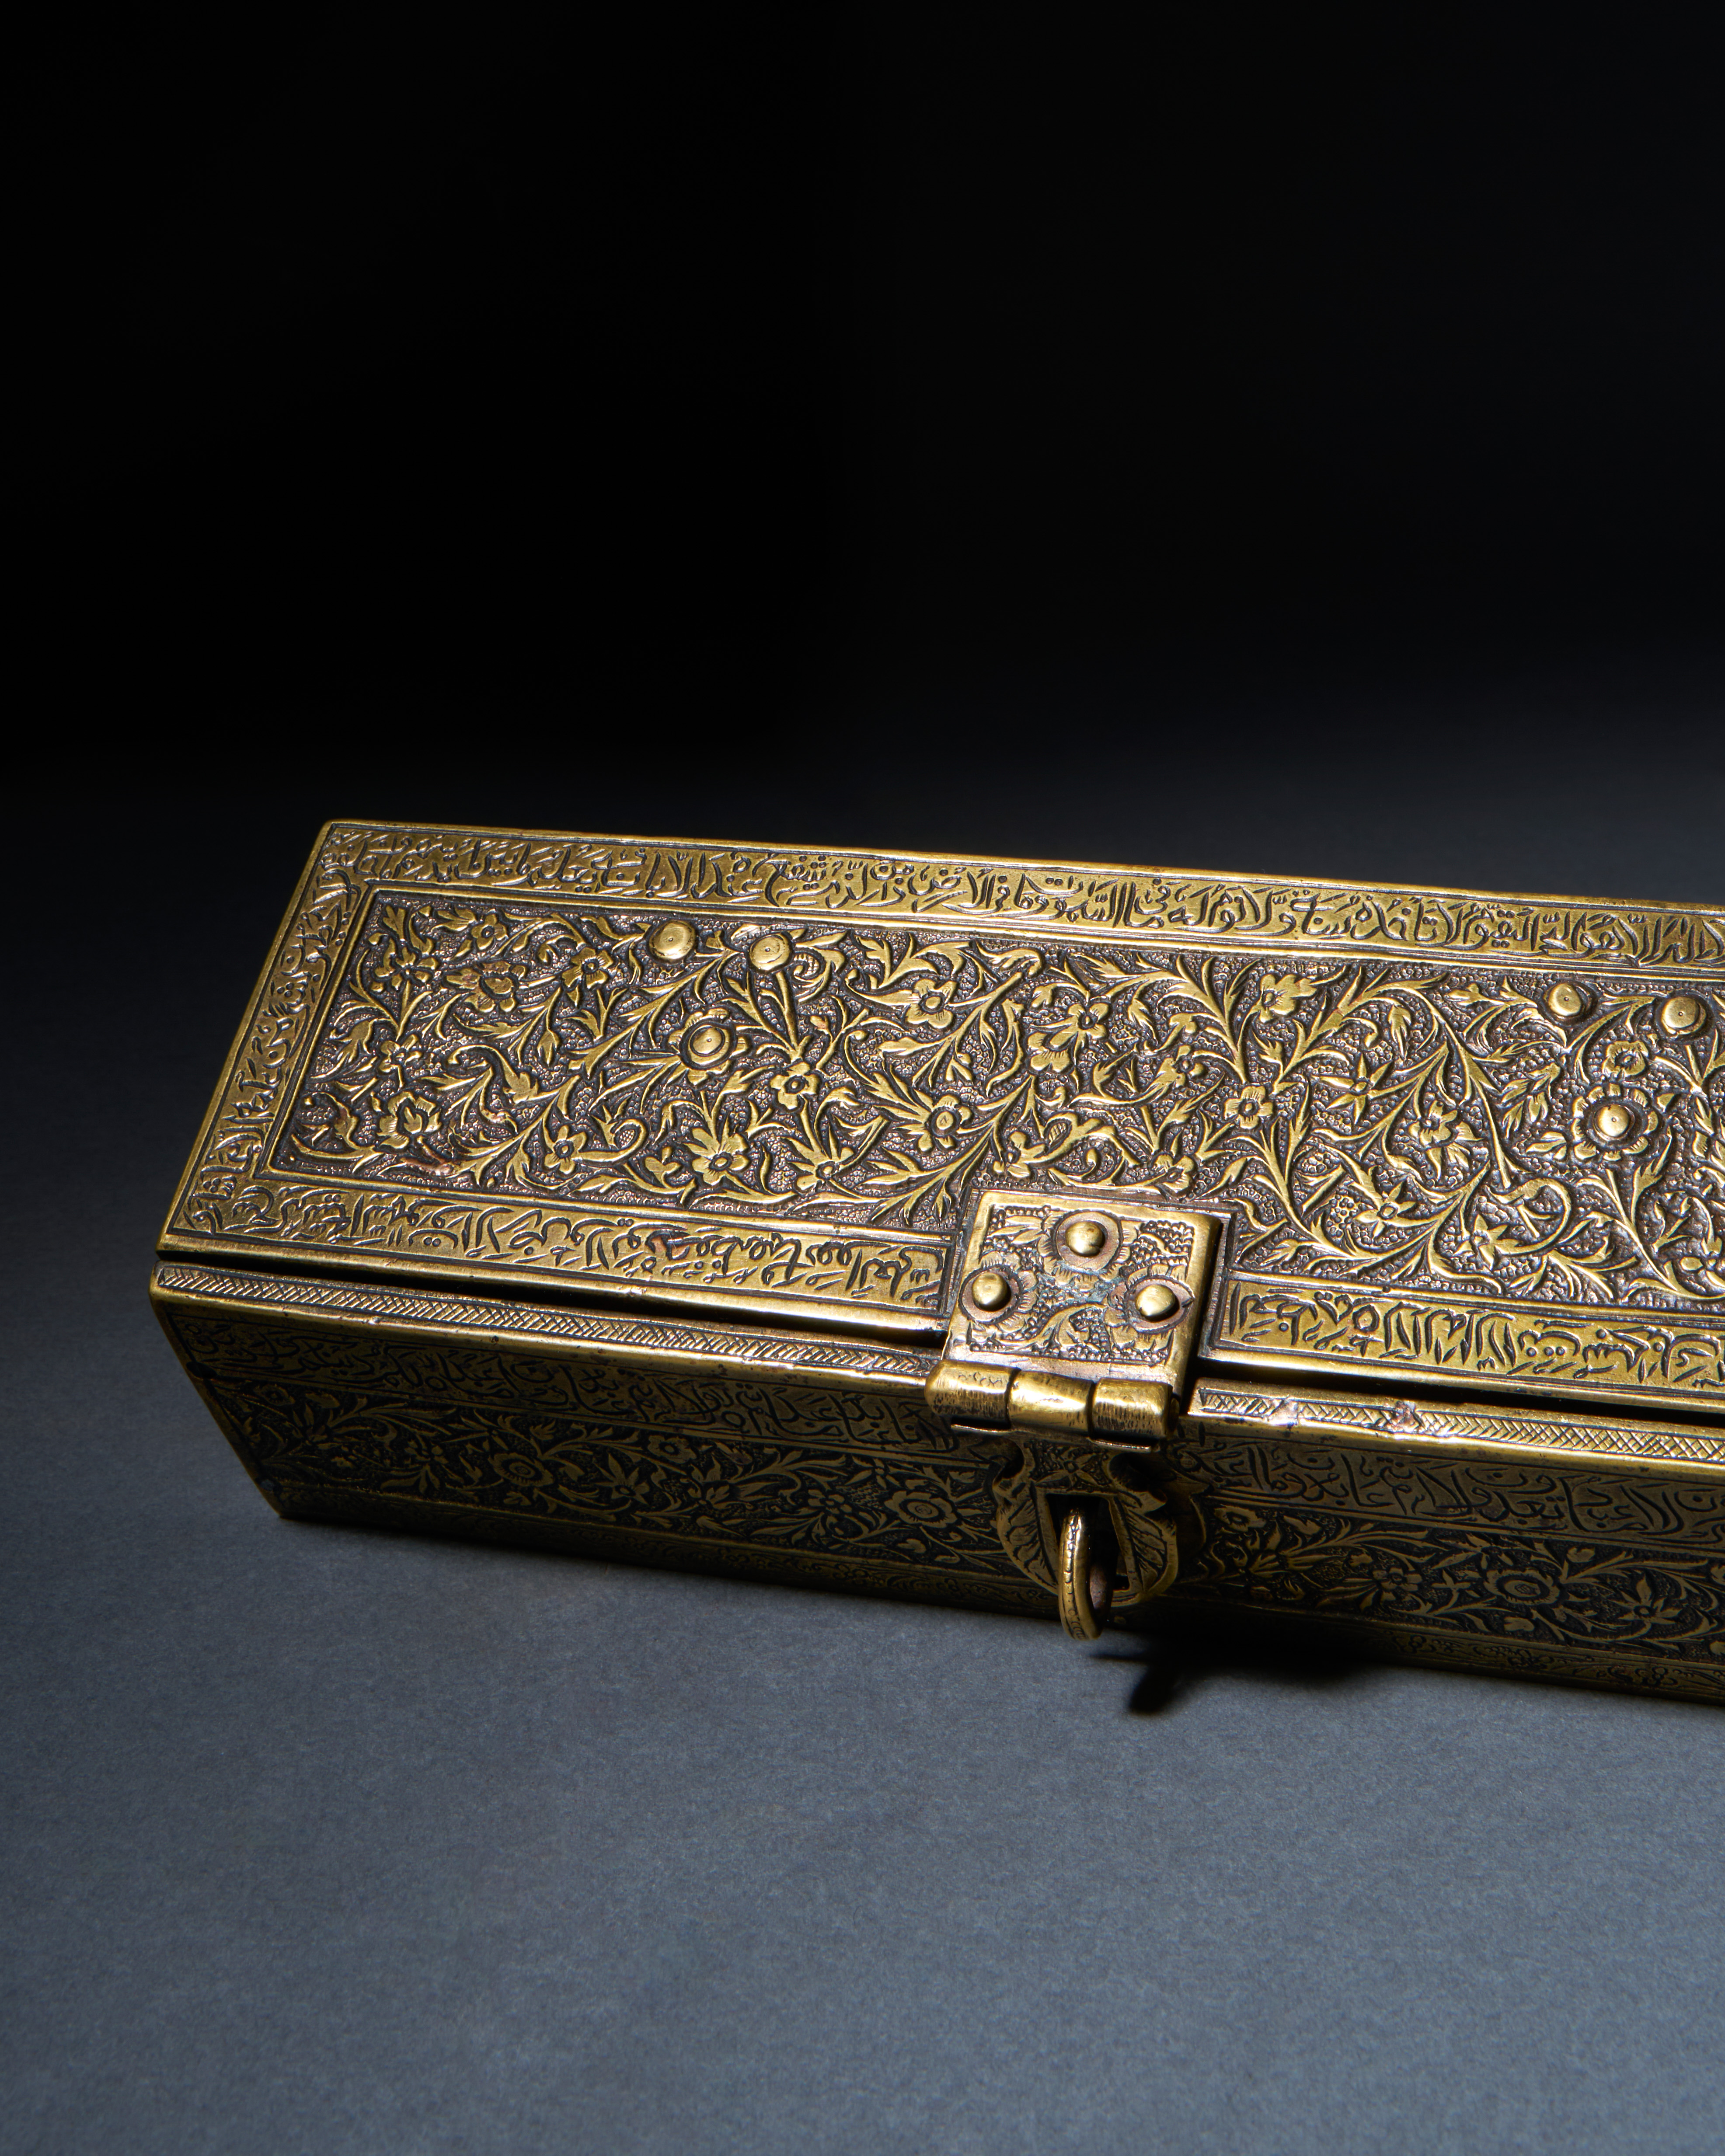 A CALLIGRAPHIC INSCRIBED BRASS INDO PERSIAN PEN CASE, 19TH CENTURY - Image 3 of 3